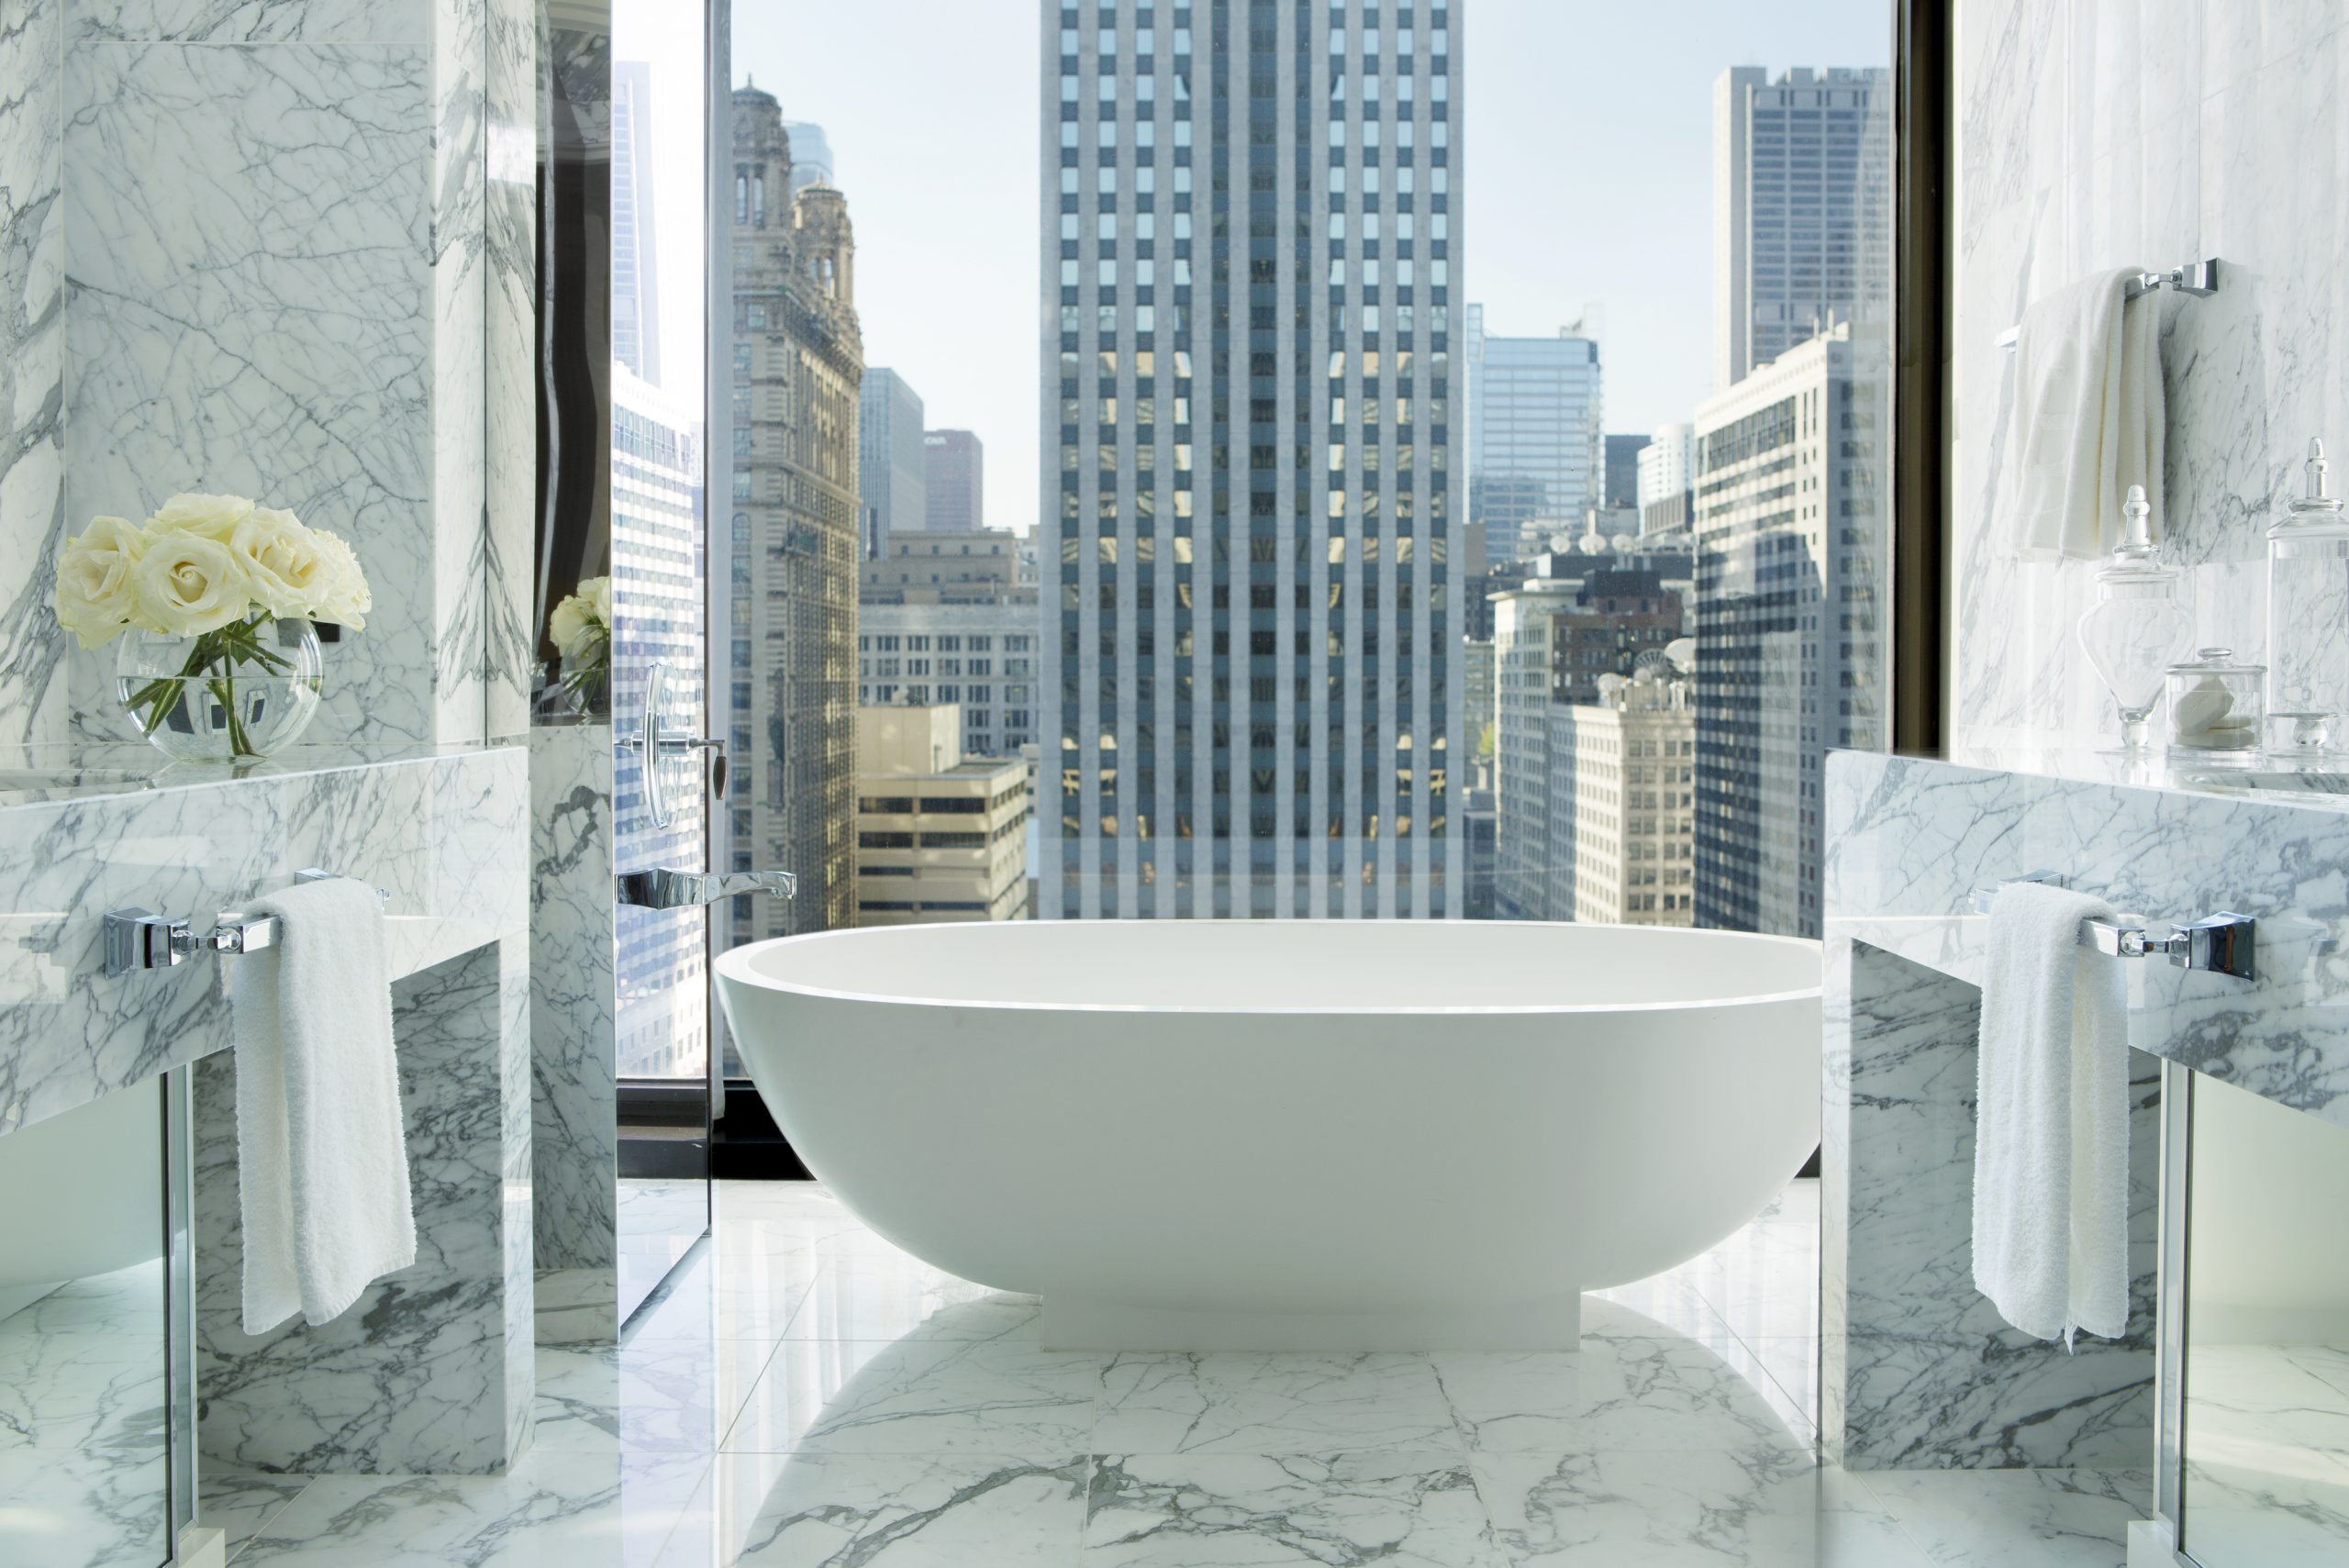 Infinity Suite Bathroom at The Langham, Chicago